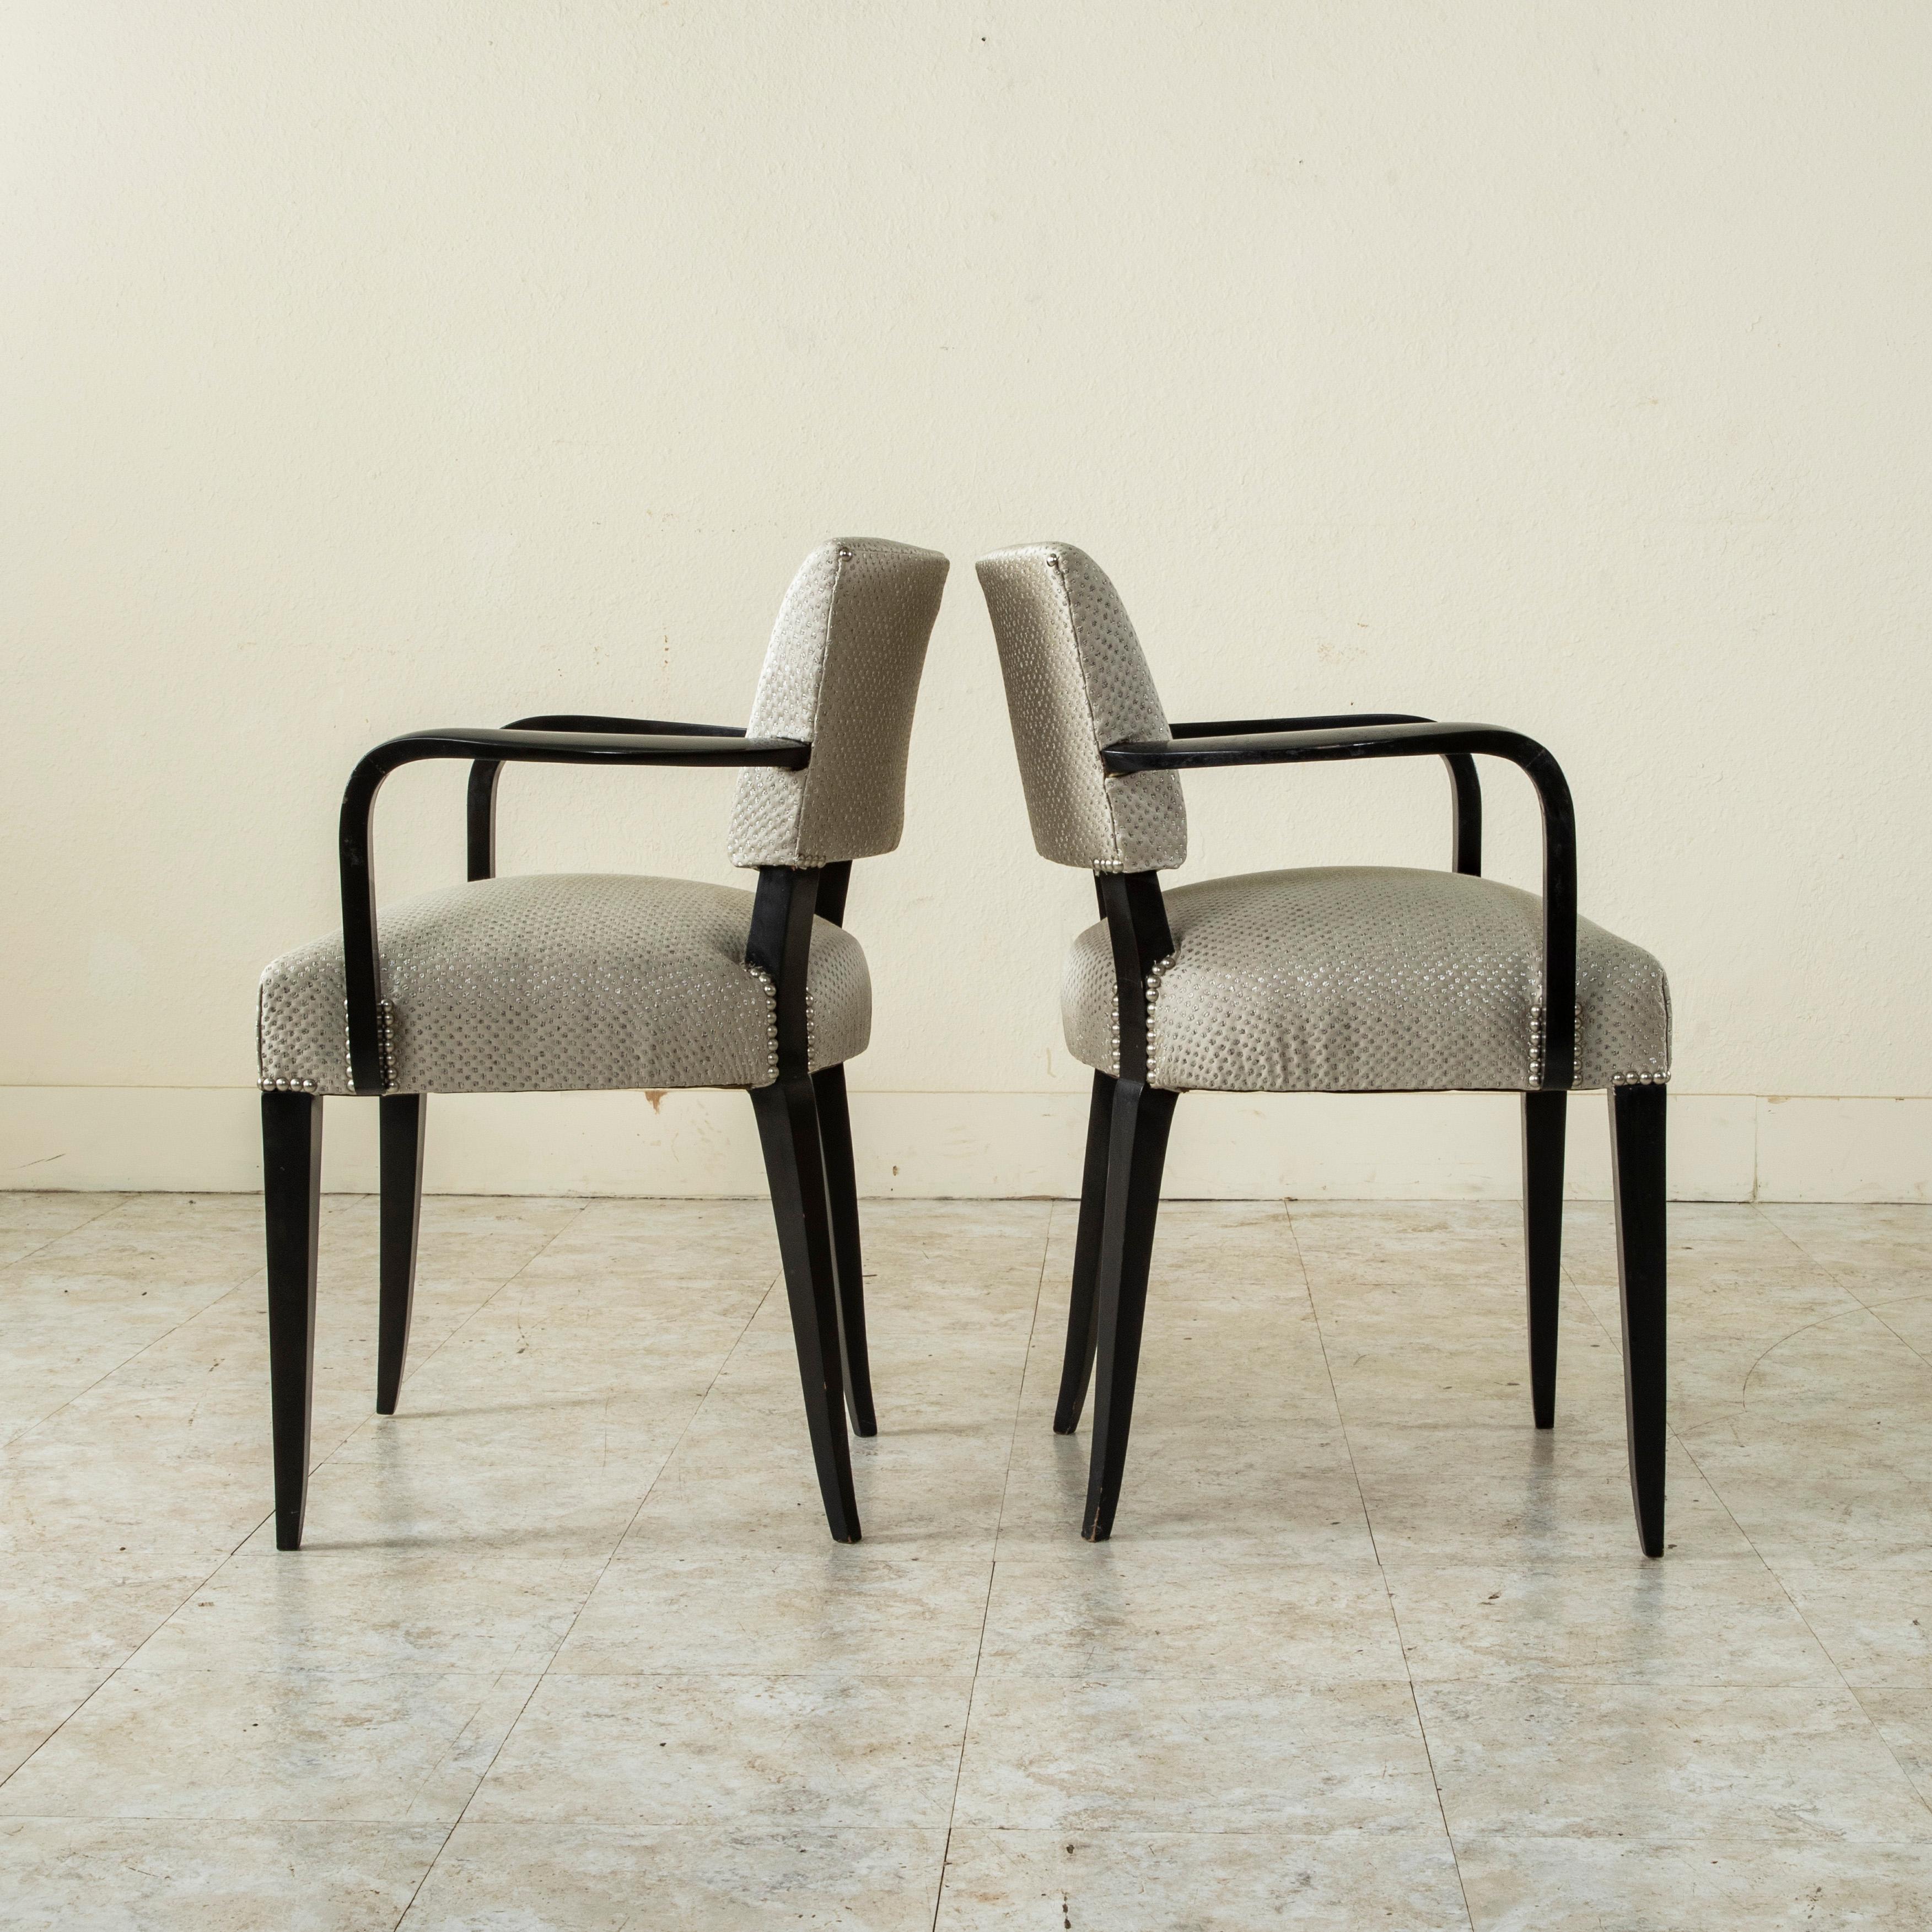 Mid-20th Century French Black Lacquer Bridge Chairs with Nail Head Trim For Sale 2